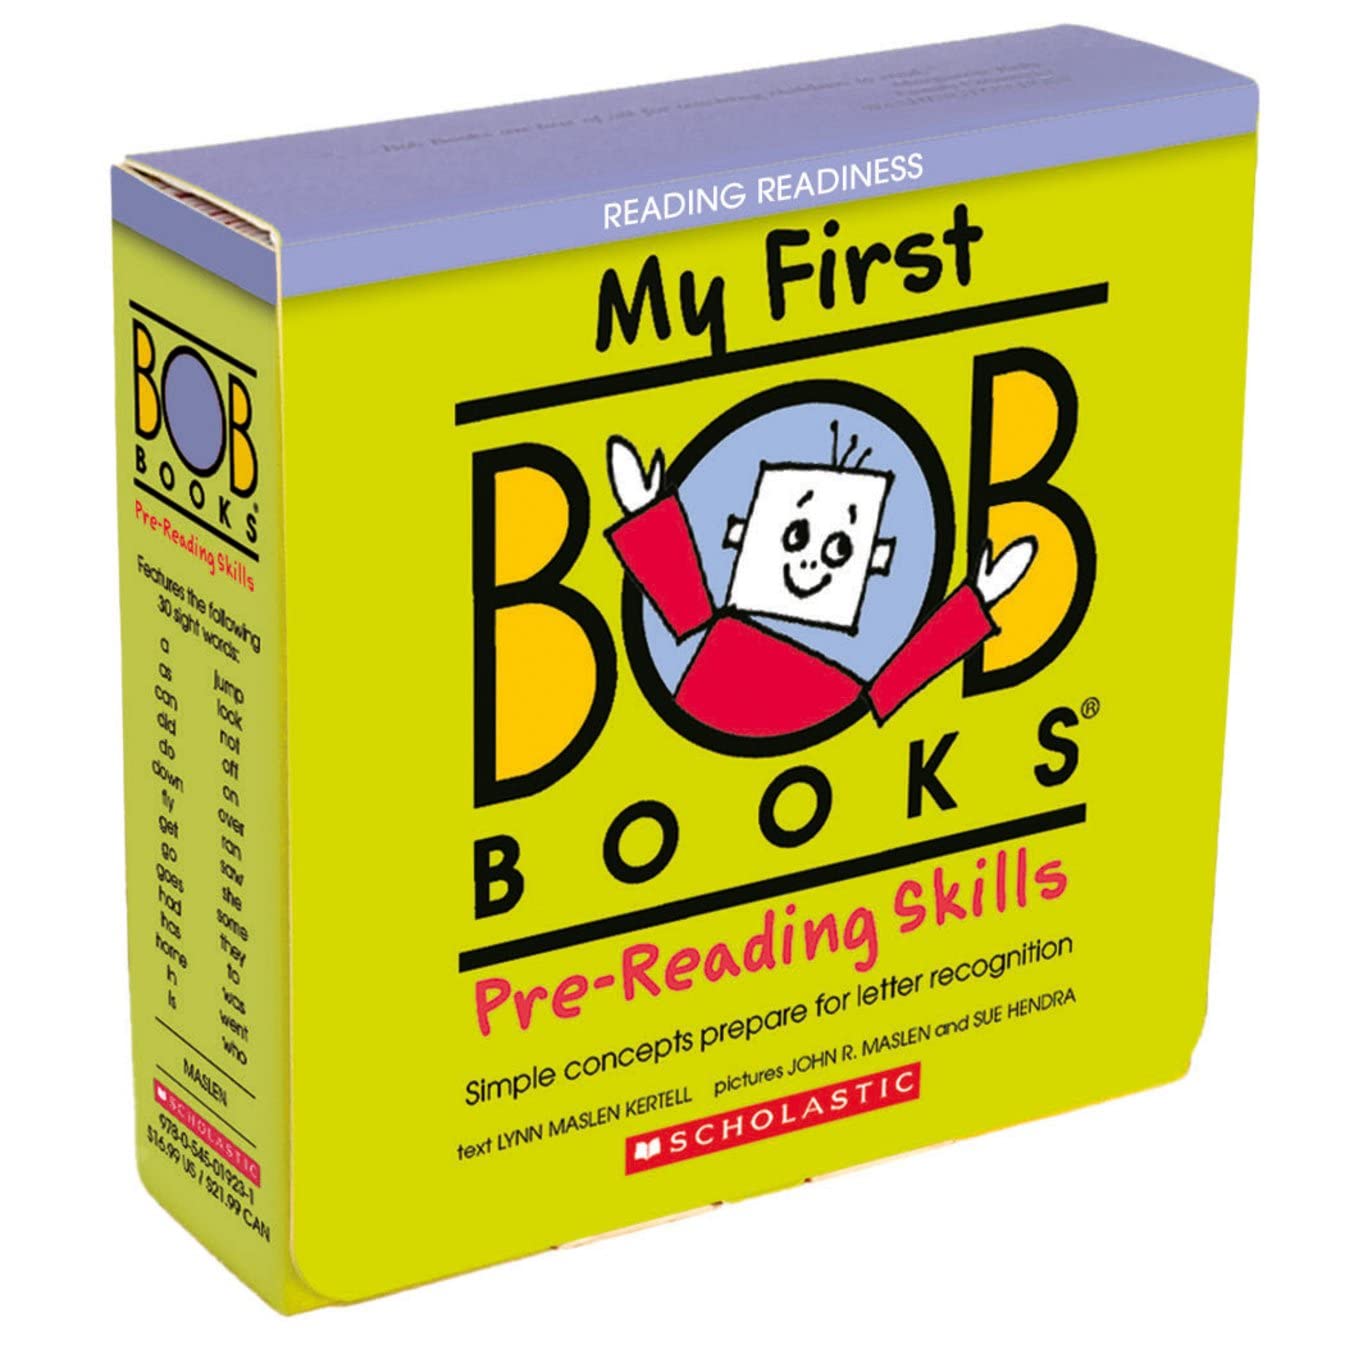 My First Bob Books - Pre-Reading Skills Box Set Phonics, Ages 3 and Up, Pre-K (Reading Readiness) (Bob Books)